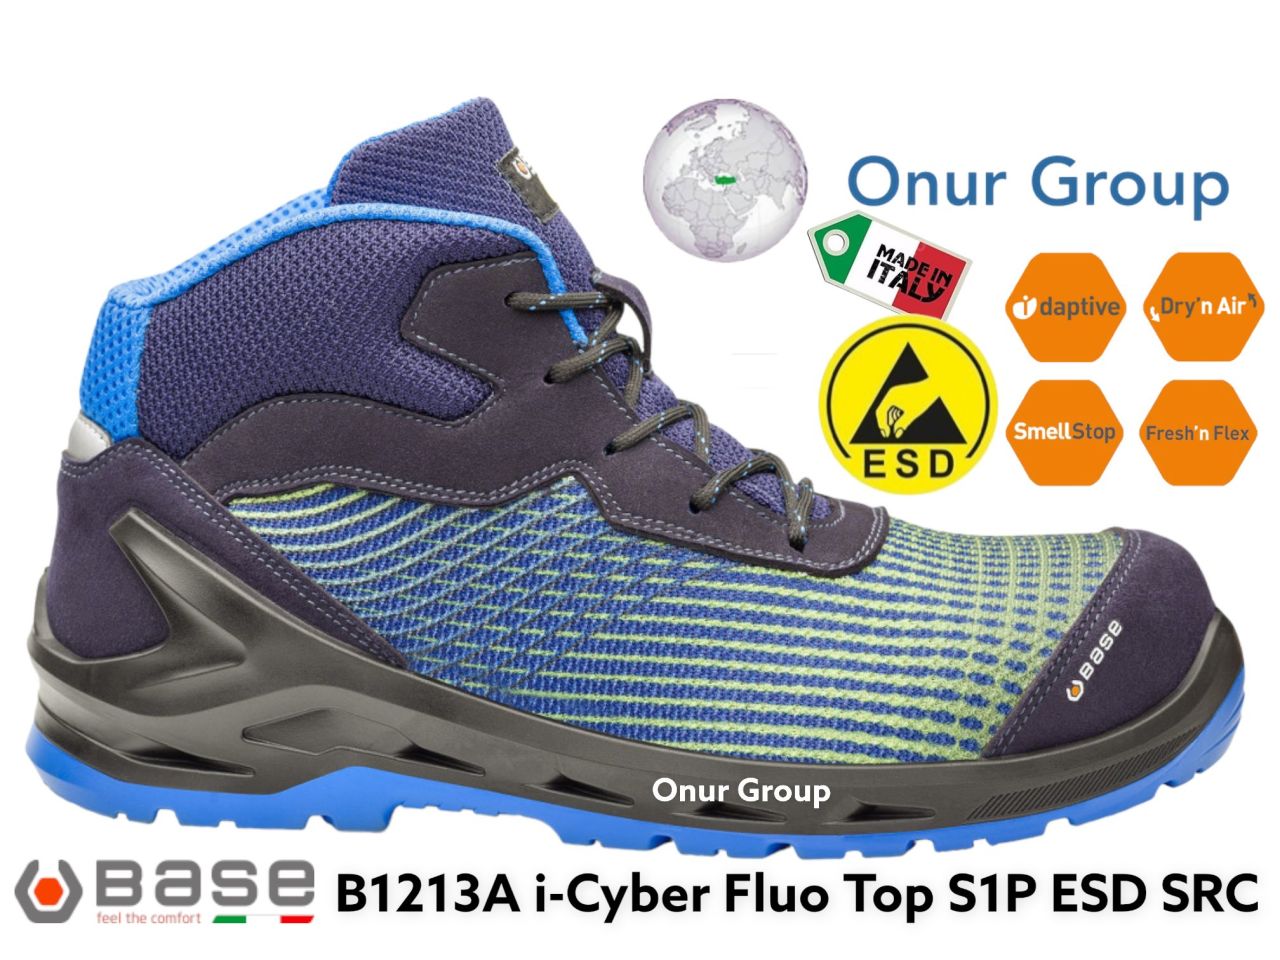 Base B1213A i-Cyber Fluo Top S1P ESD SRC